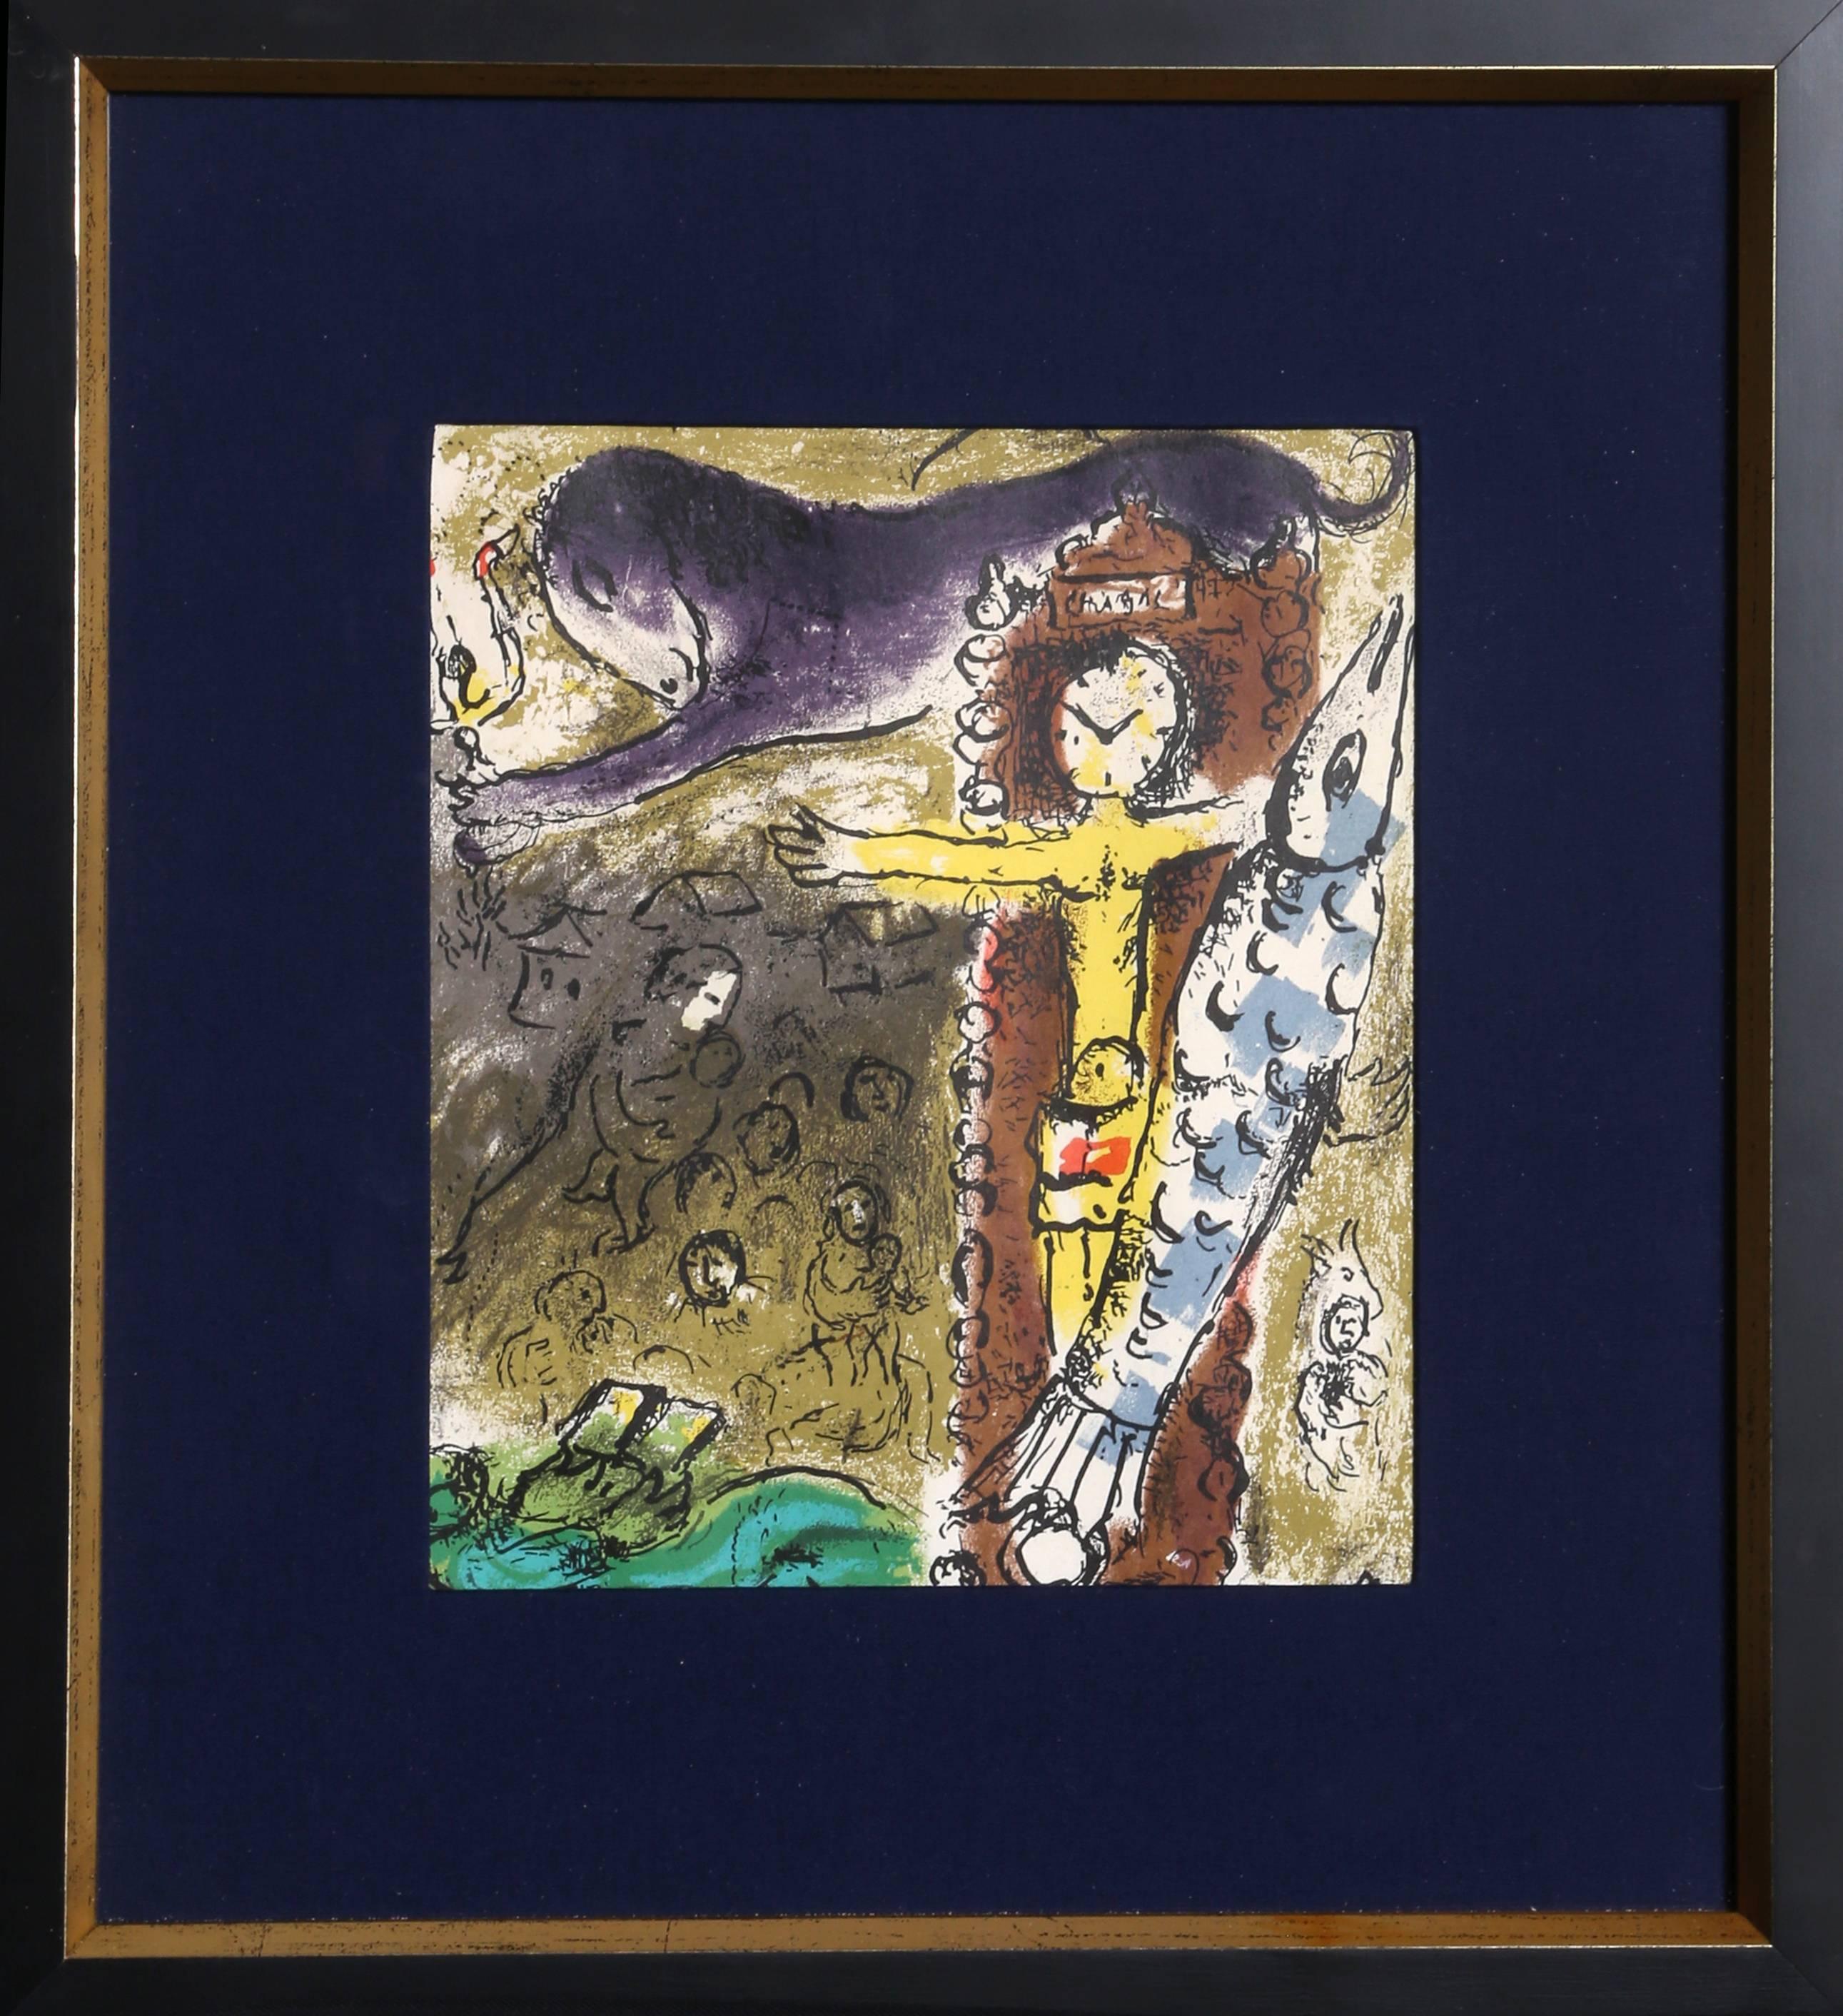 Marc Chagall Figurative Print - Le Christ l'Horloge, Framed Lithograph by Chagall 1957